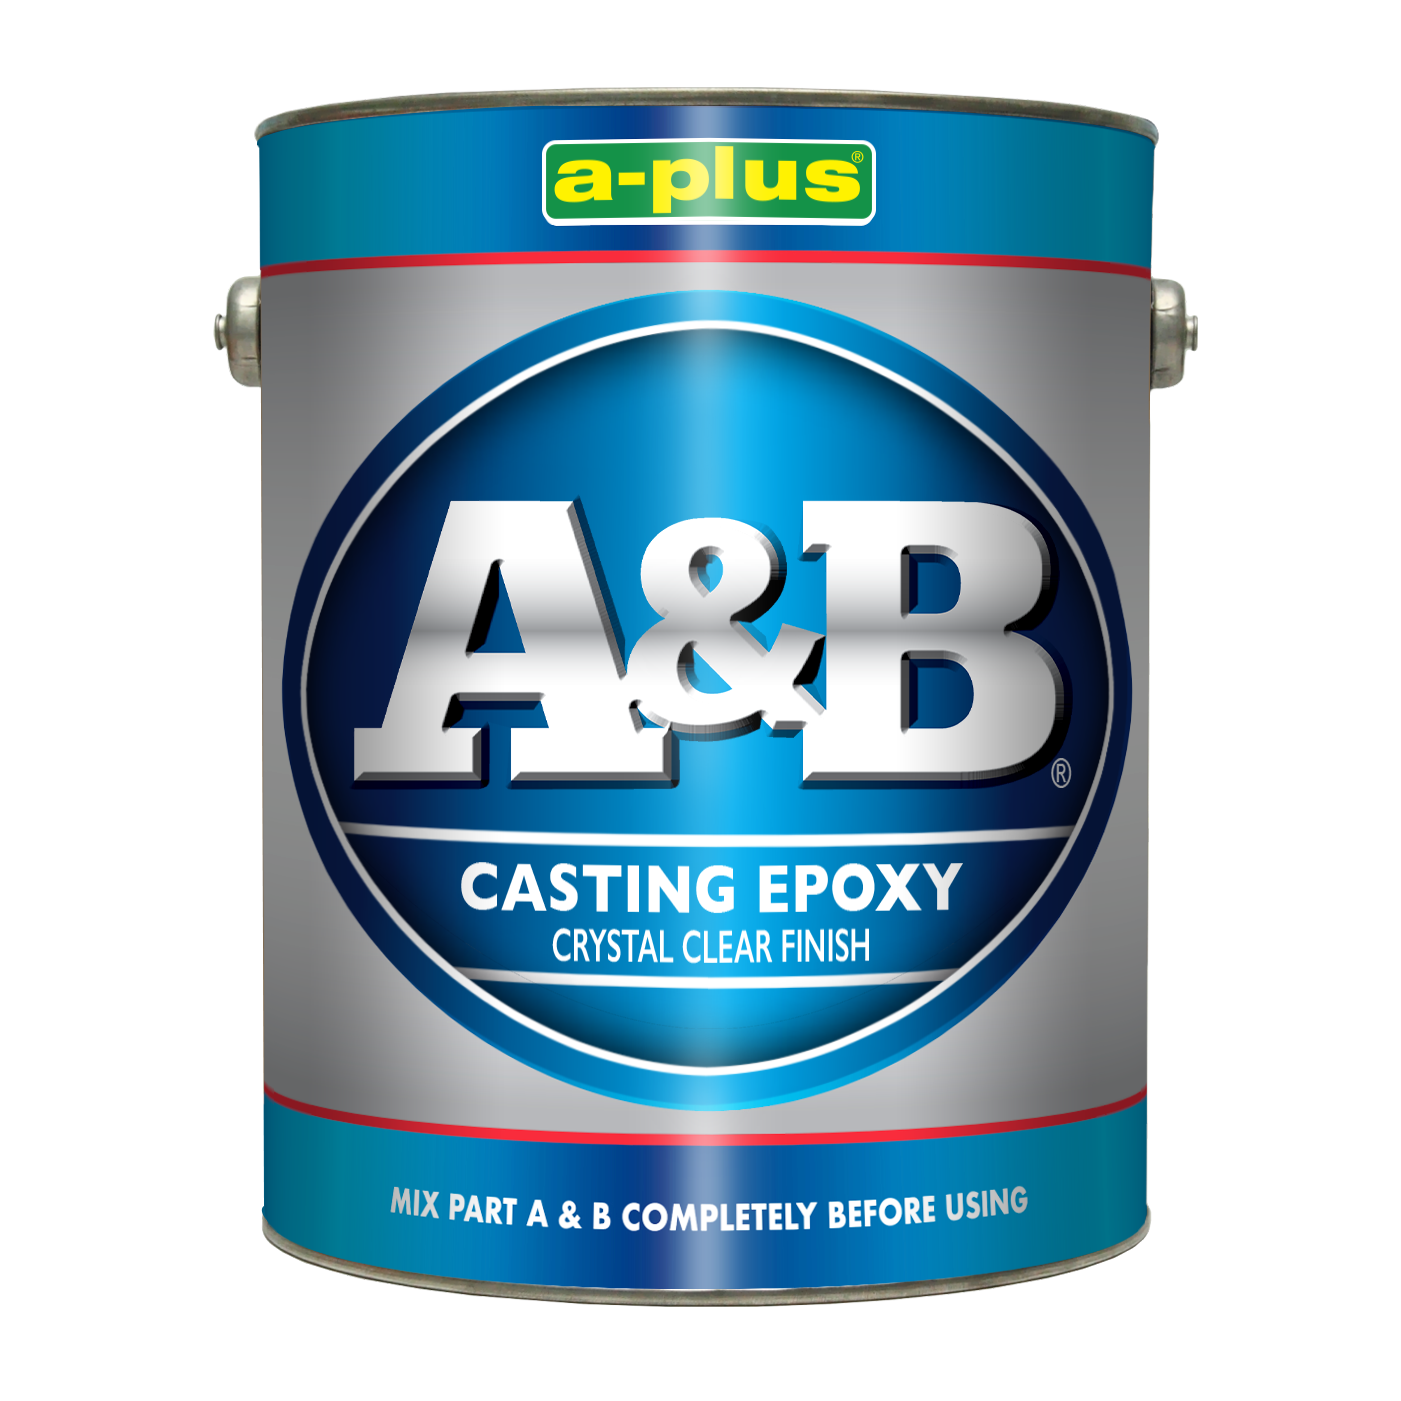 A-Plus Paints  Paint Products Manufacturers and Suppliers in